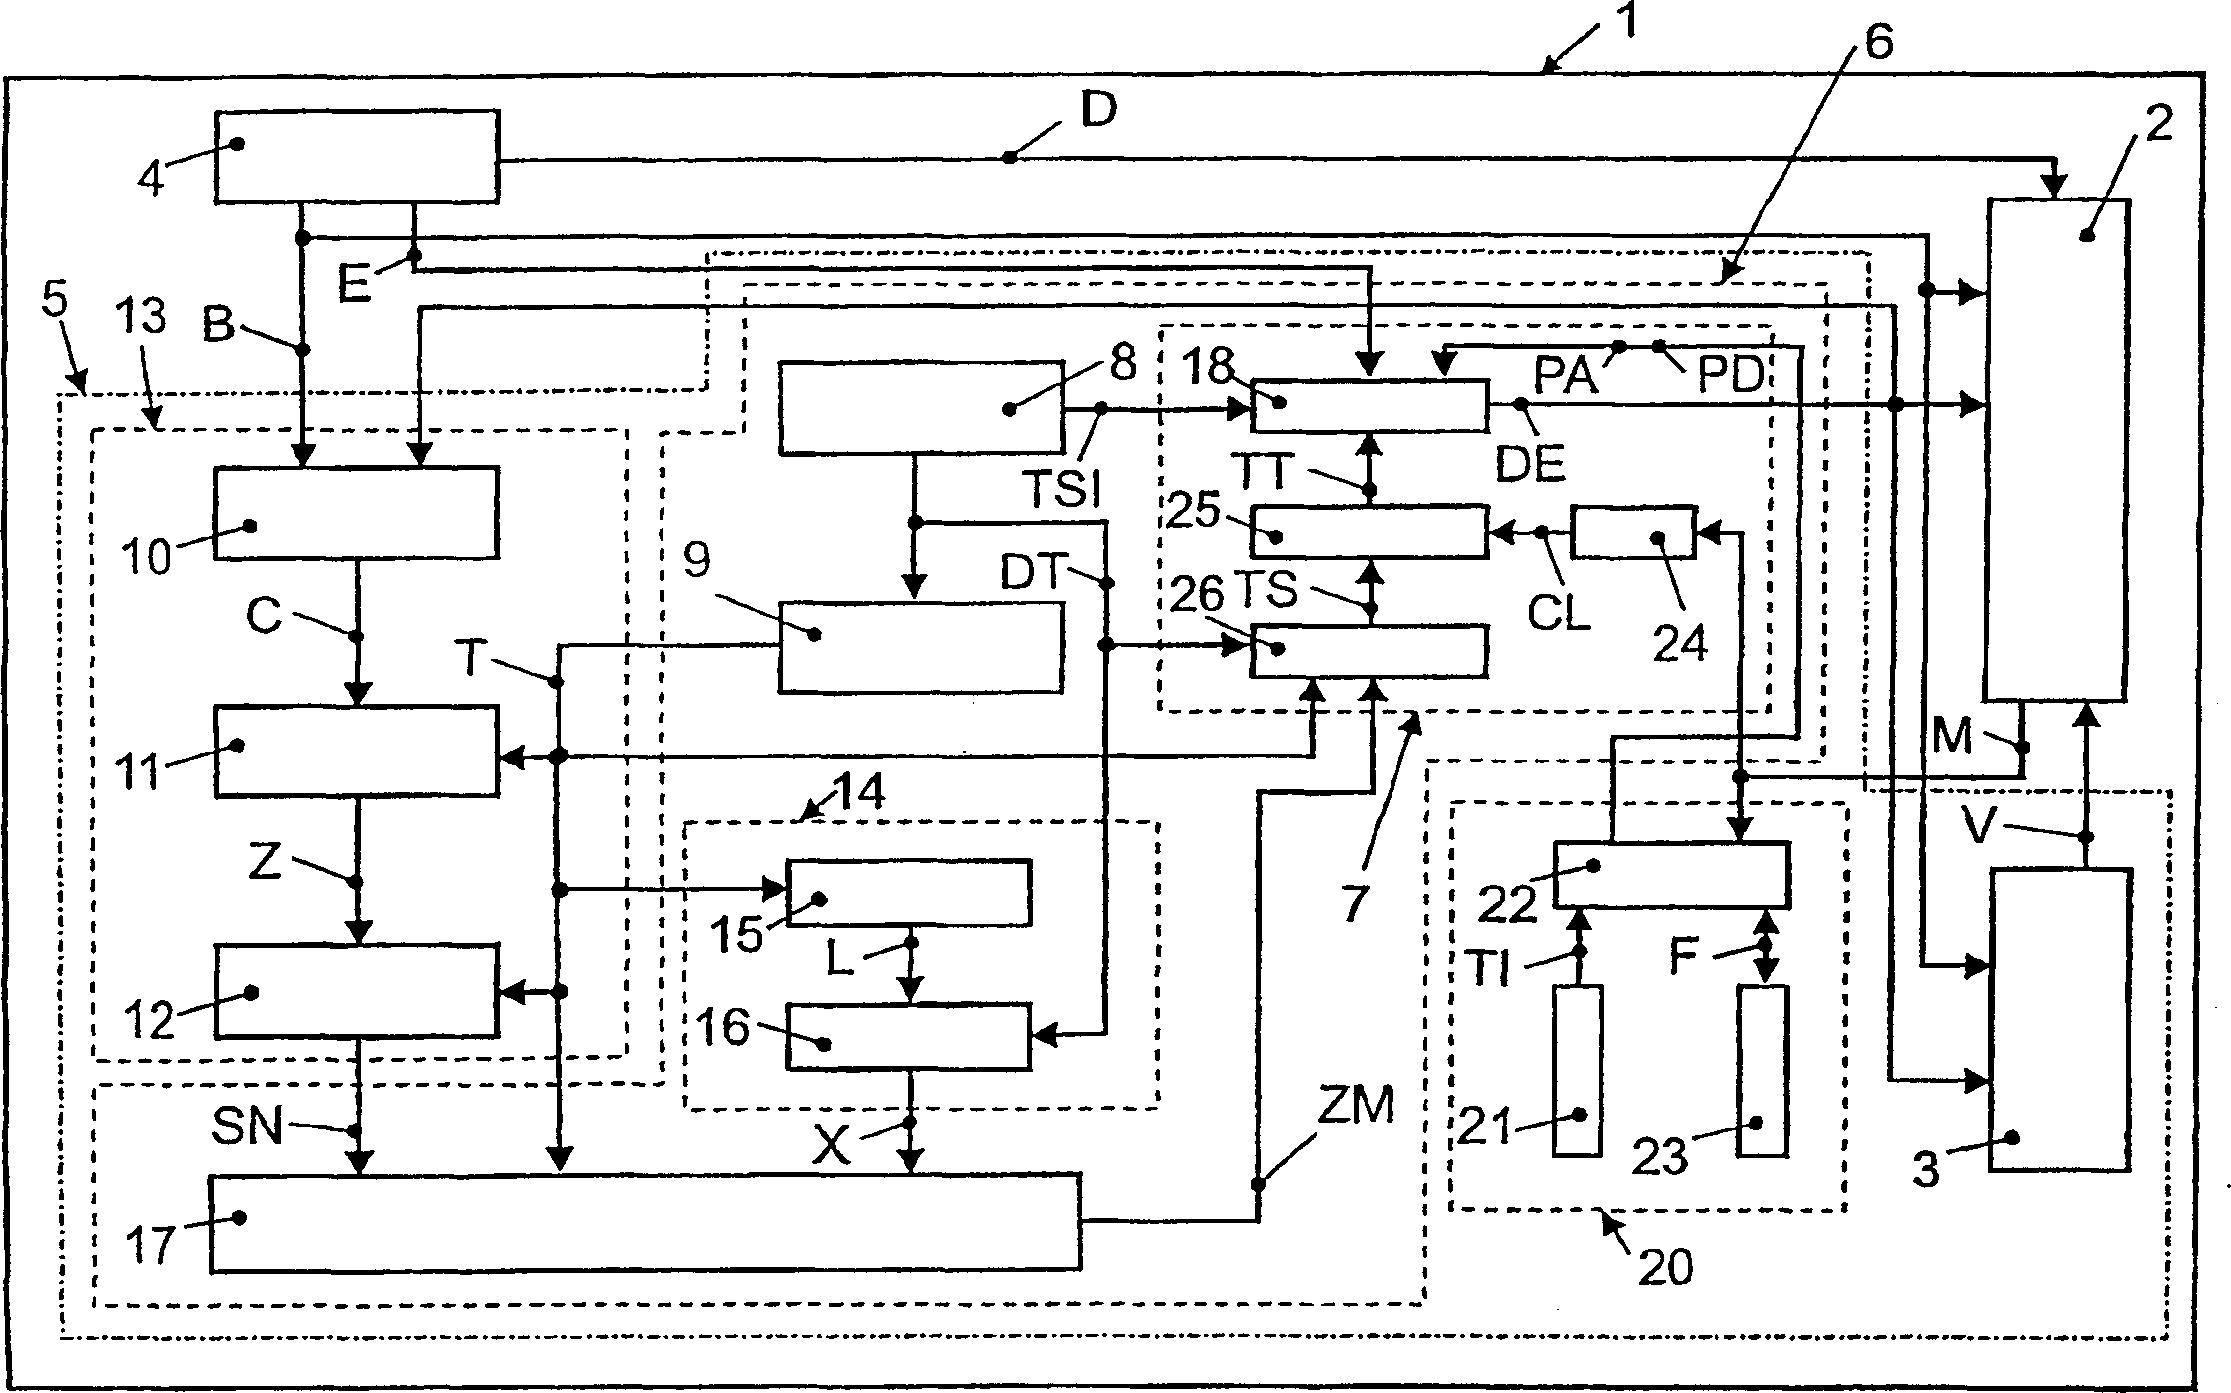 Device with modular unit able to be started and stop